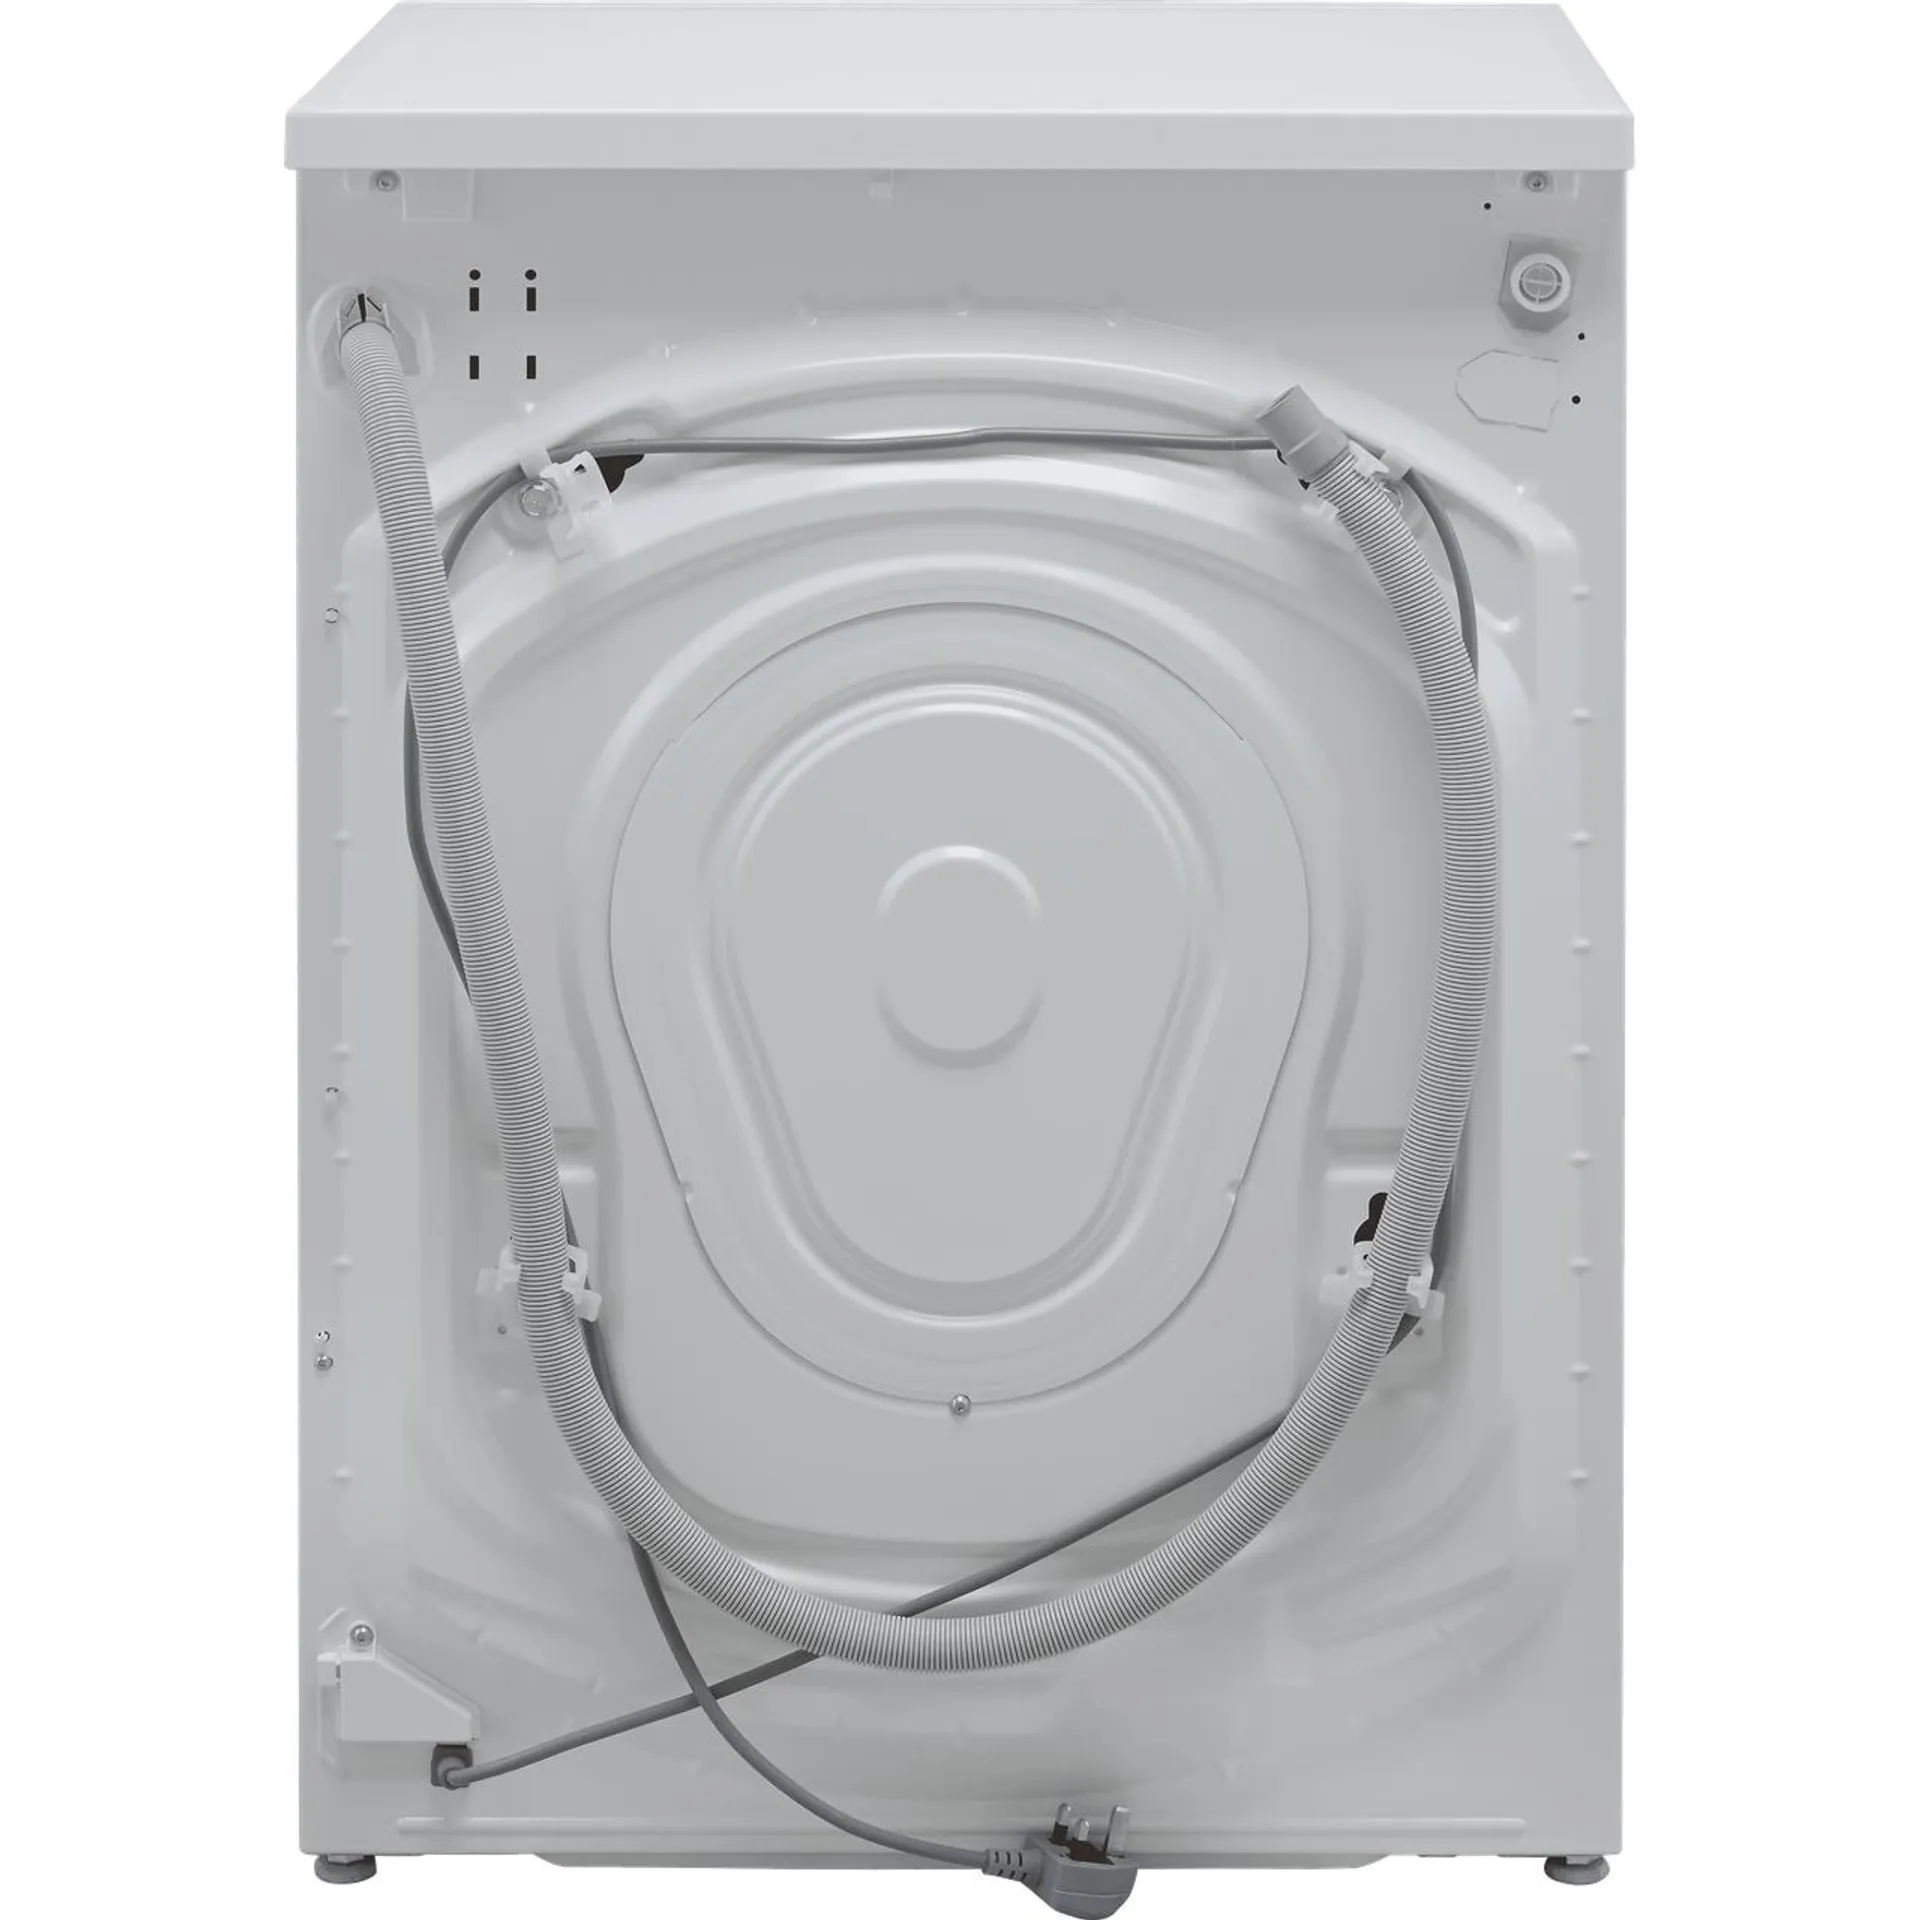 Bosch Series 4 WAN28281GB 8Kg Washing Machine with 1400 rpm - White - C Rated